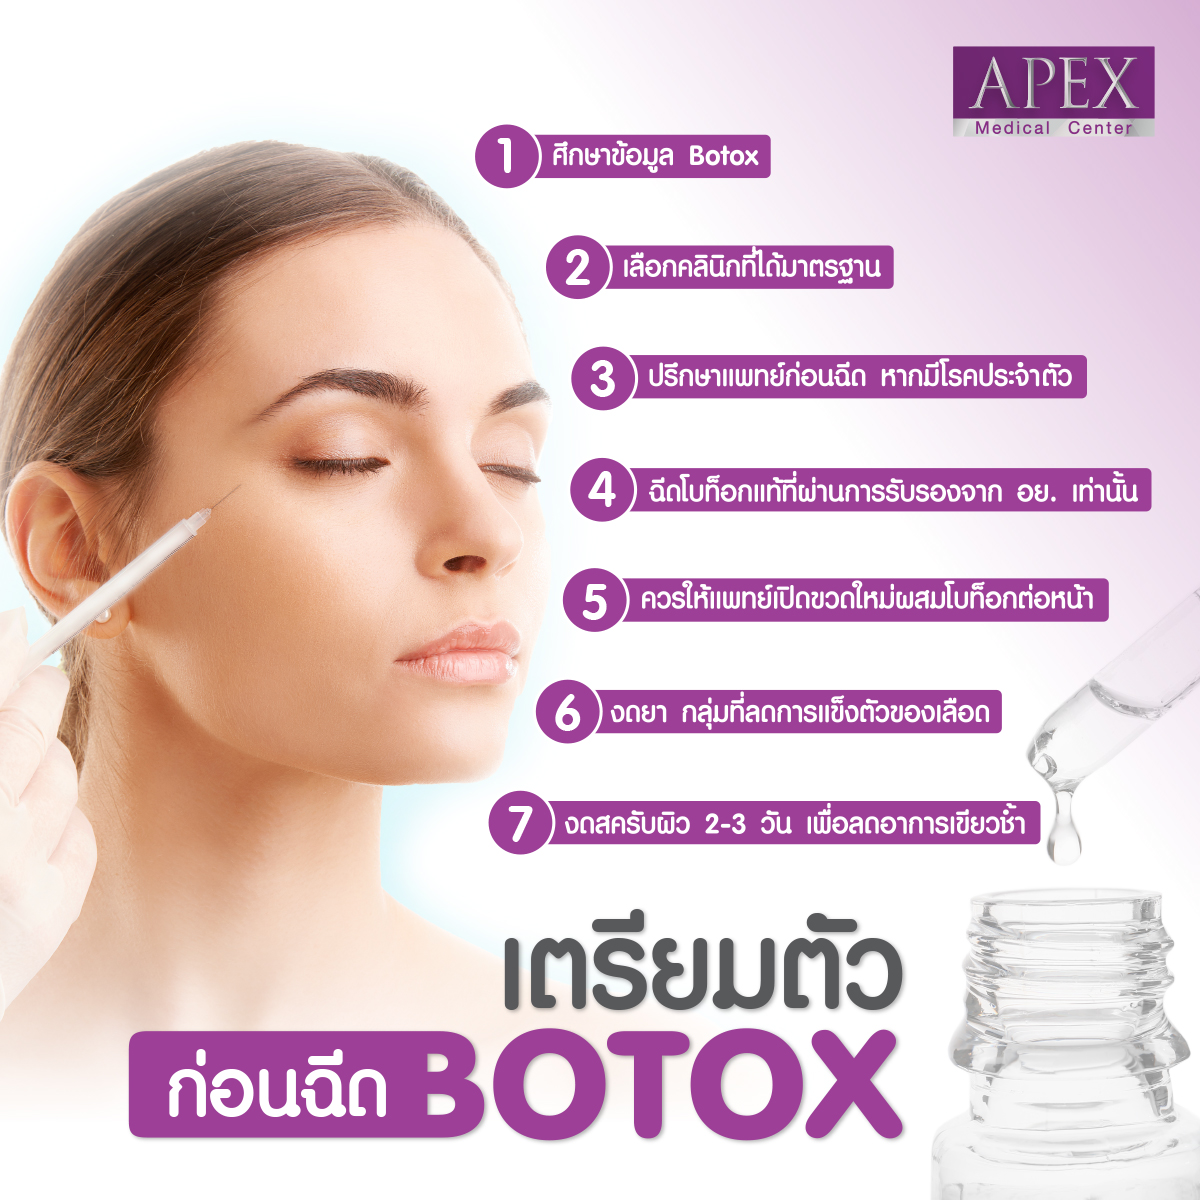 Injecting botox into your face is a great way to make it look smoother, fuller, and more attractive. Getting botox injections on a regular basis can prolong the youthful state of your face, staving off wrinkles and age lines.